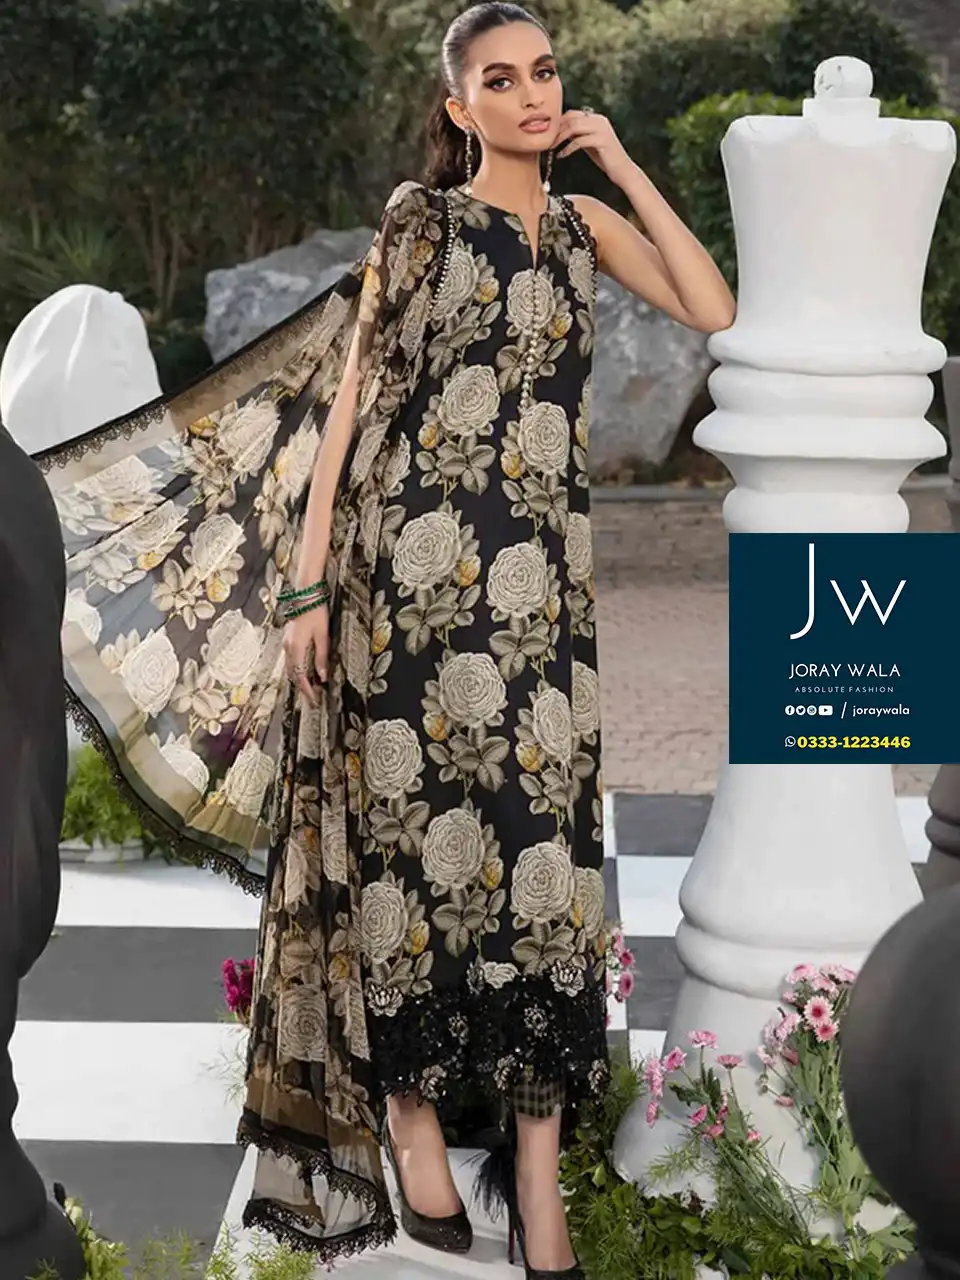 A Pakistani model wearing a Maria b fancy lawn collection suit and standing in the garden, the suit code is MPT-2103A/B-B-24